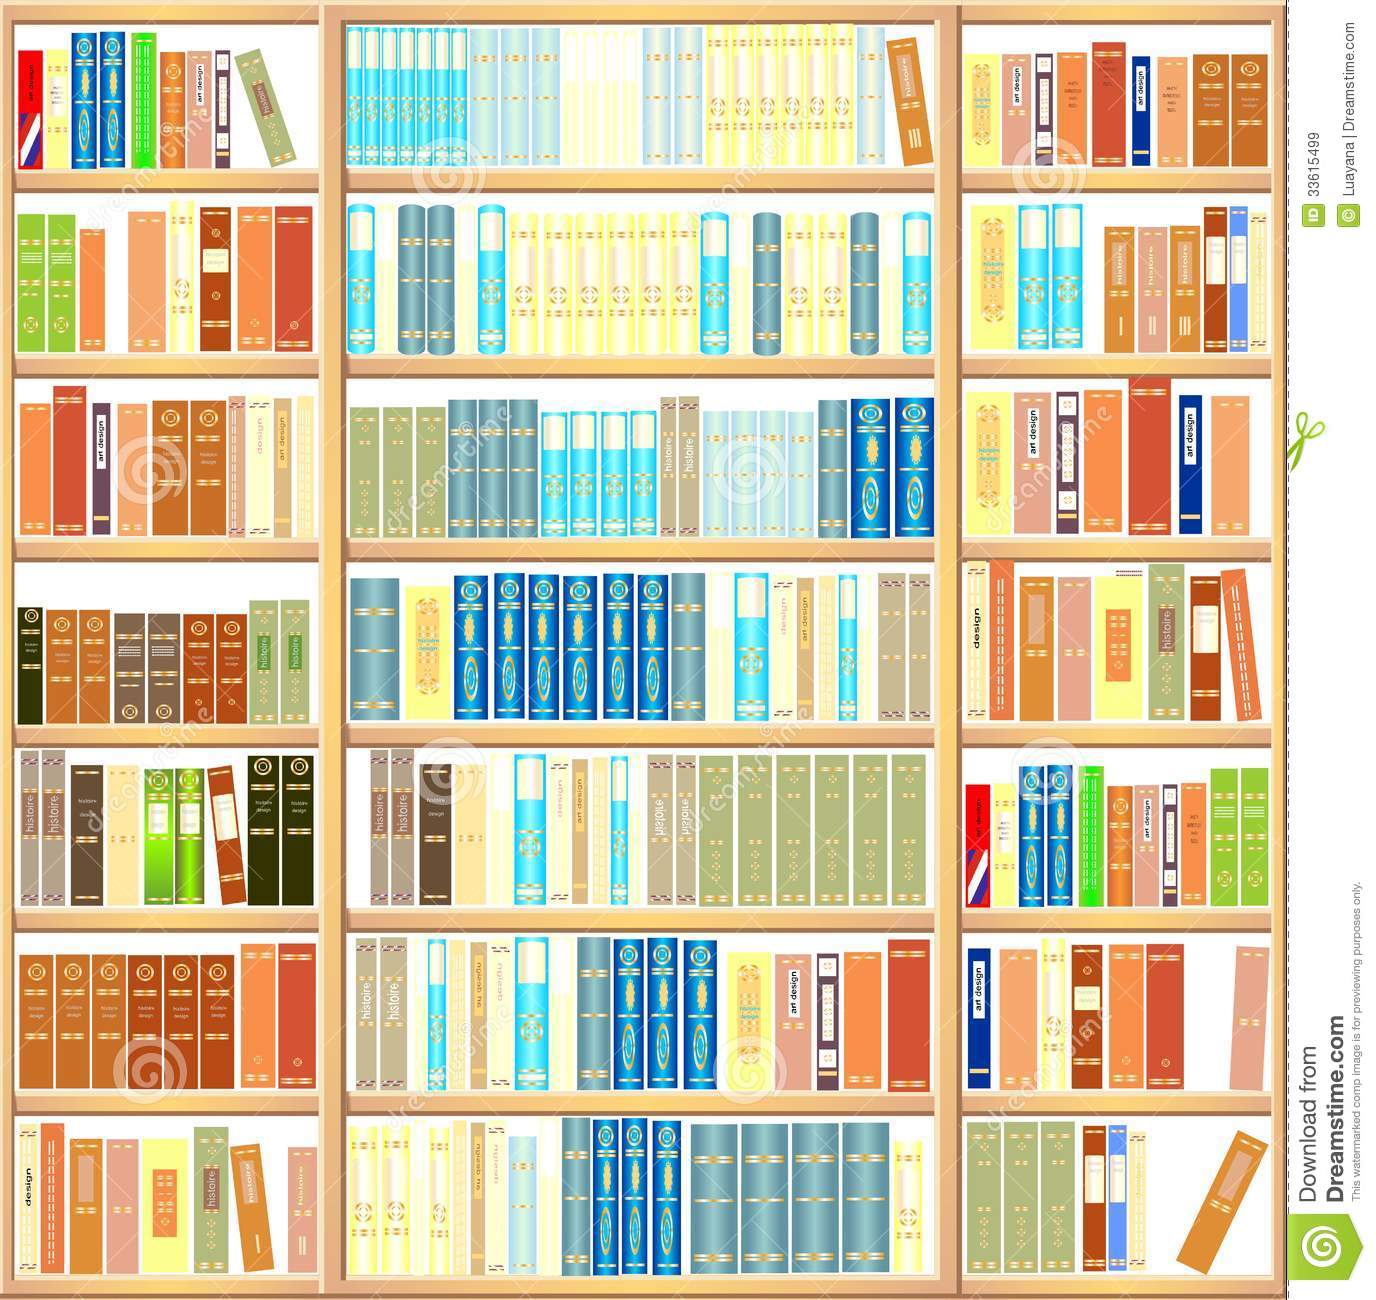 Description From Clipart Illustration Of A Bookcase Full Of Books